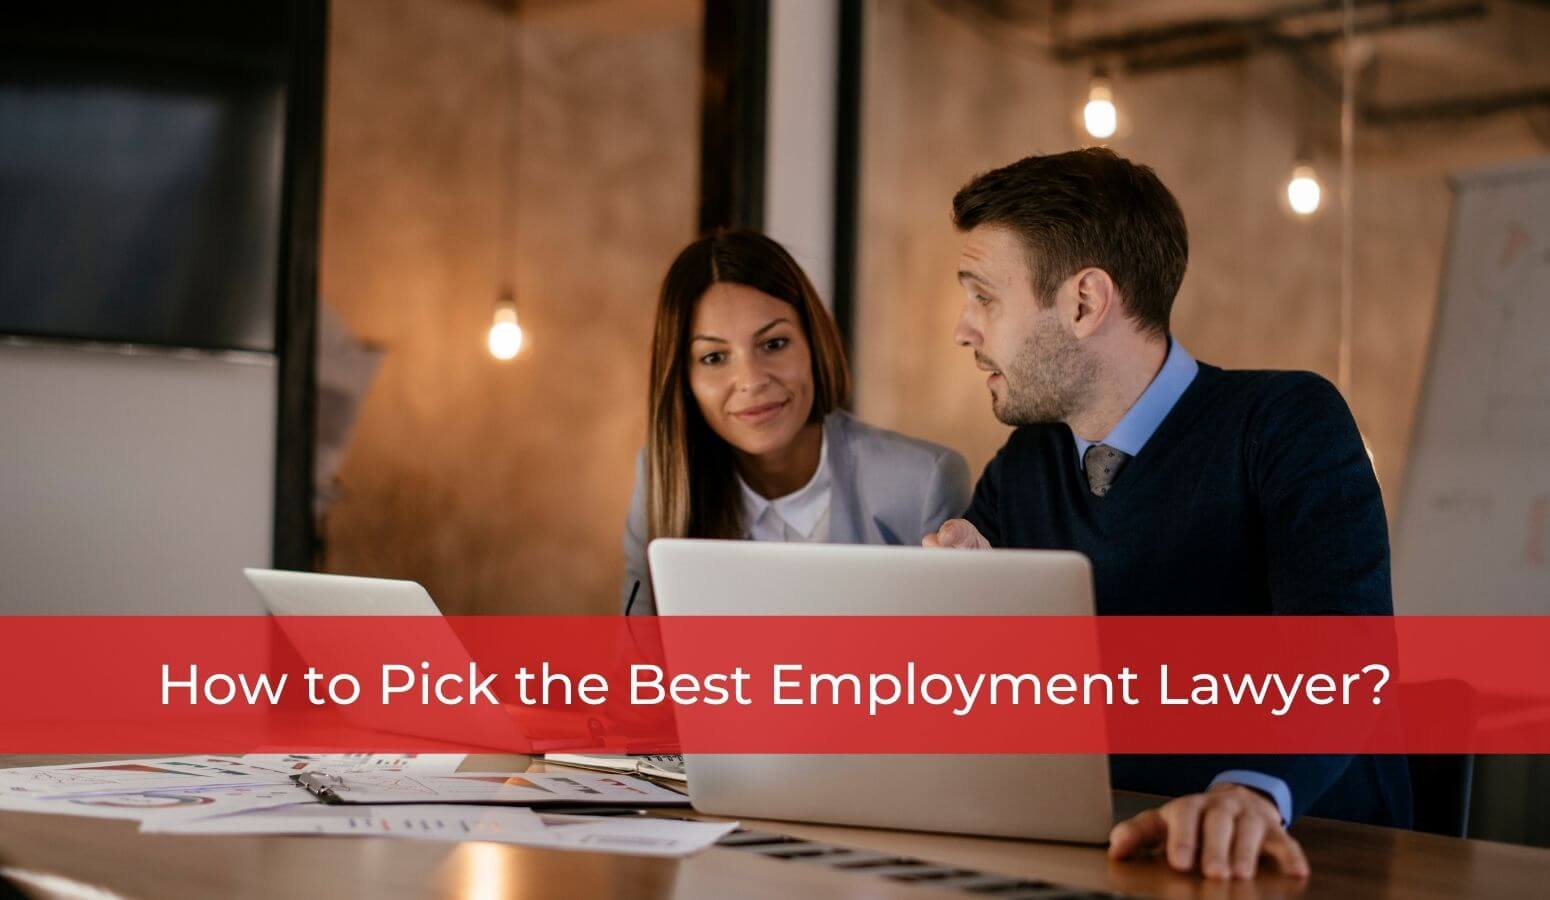 Featured image for “How to Pick the Best Employment Lawyer?”